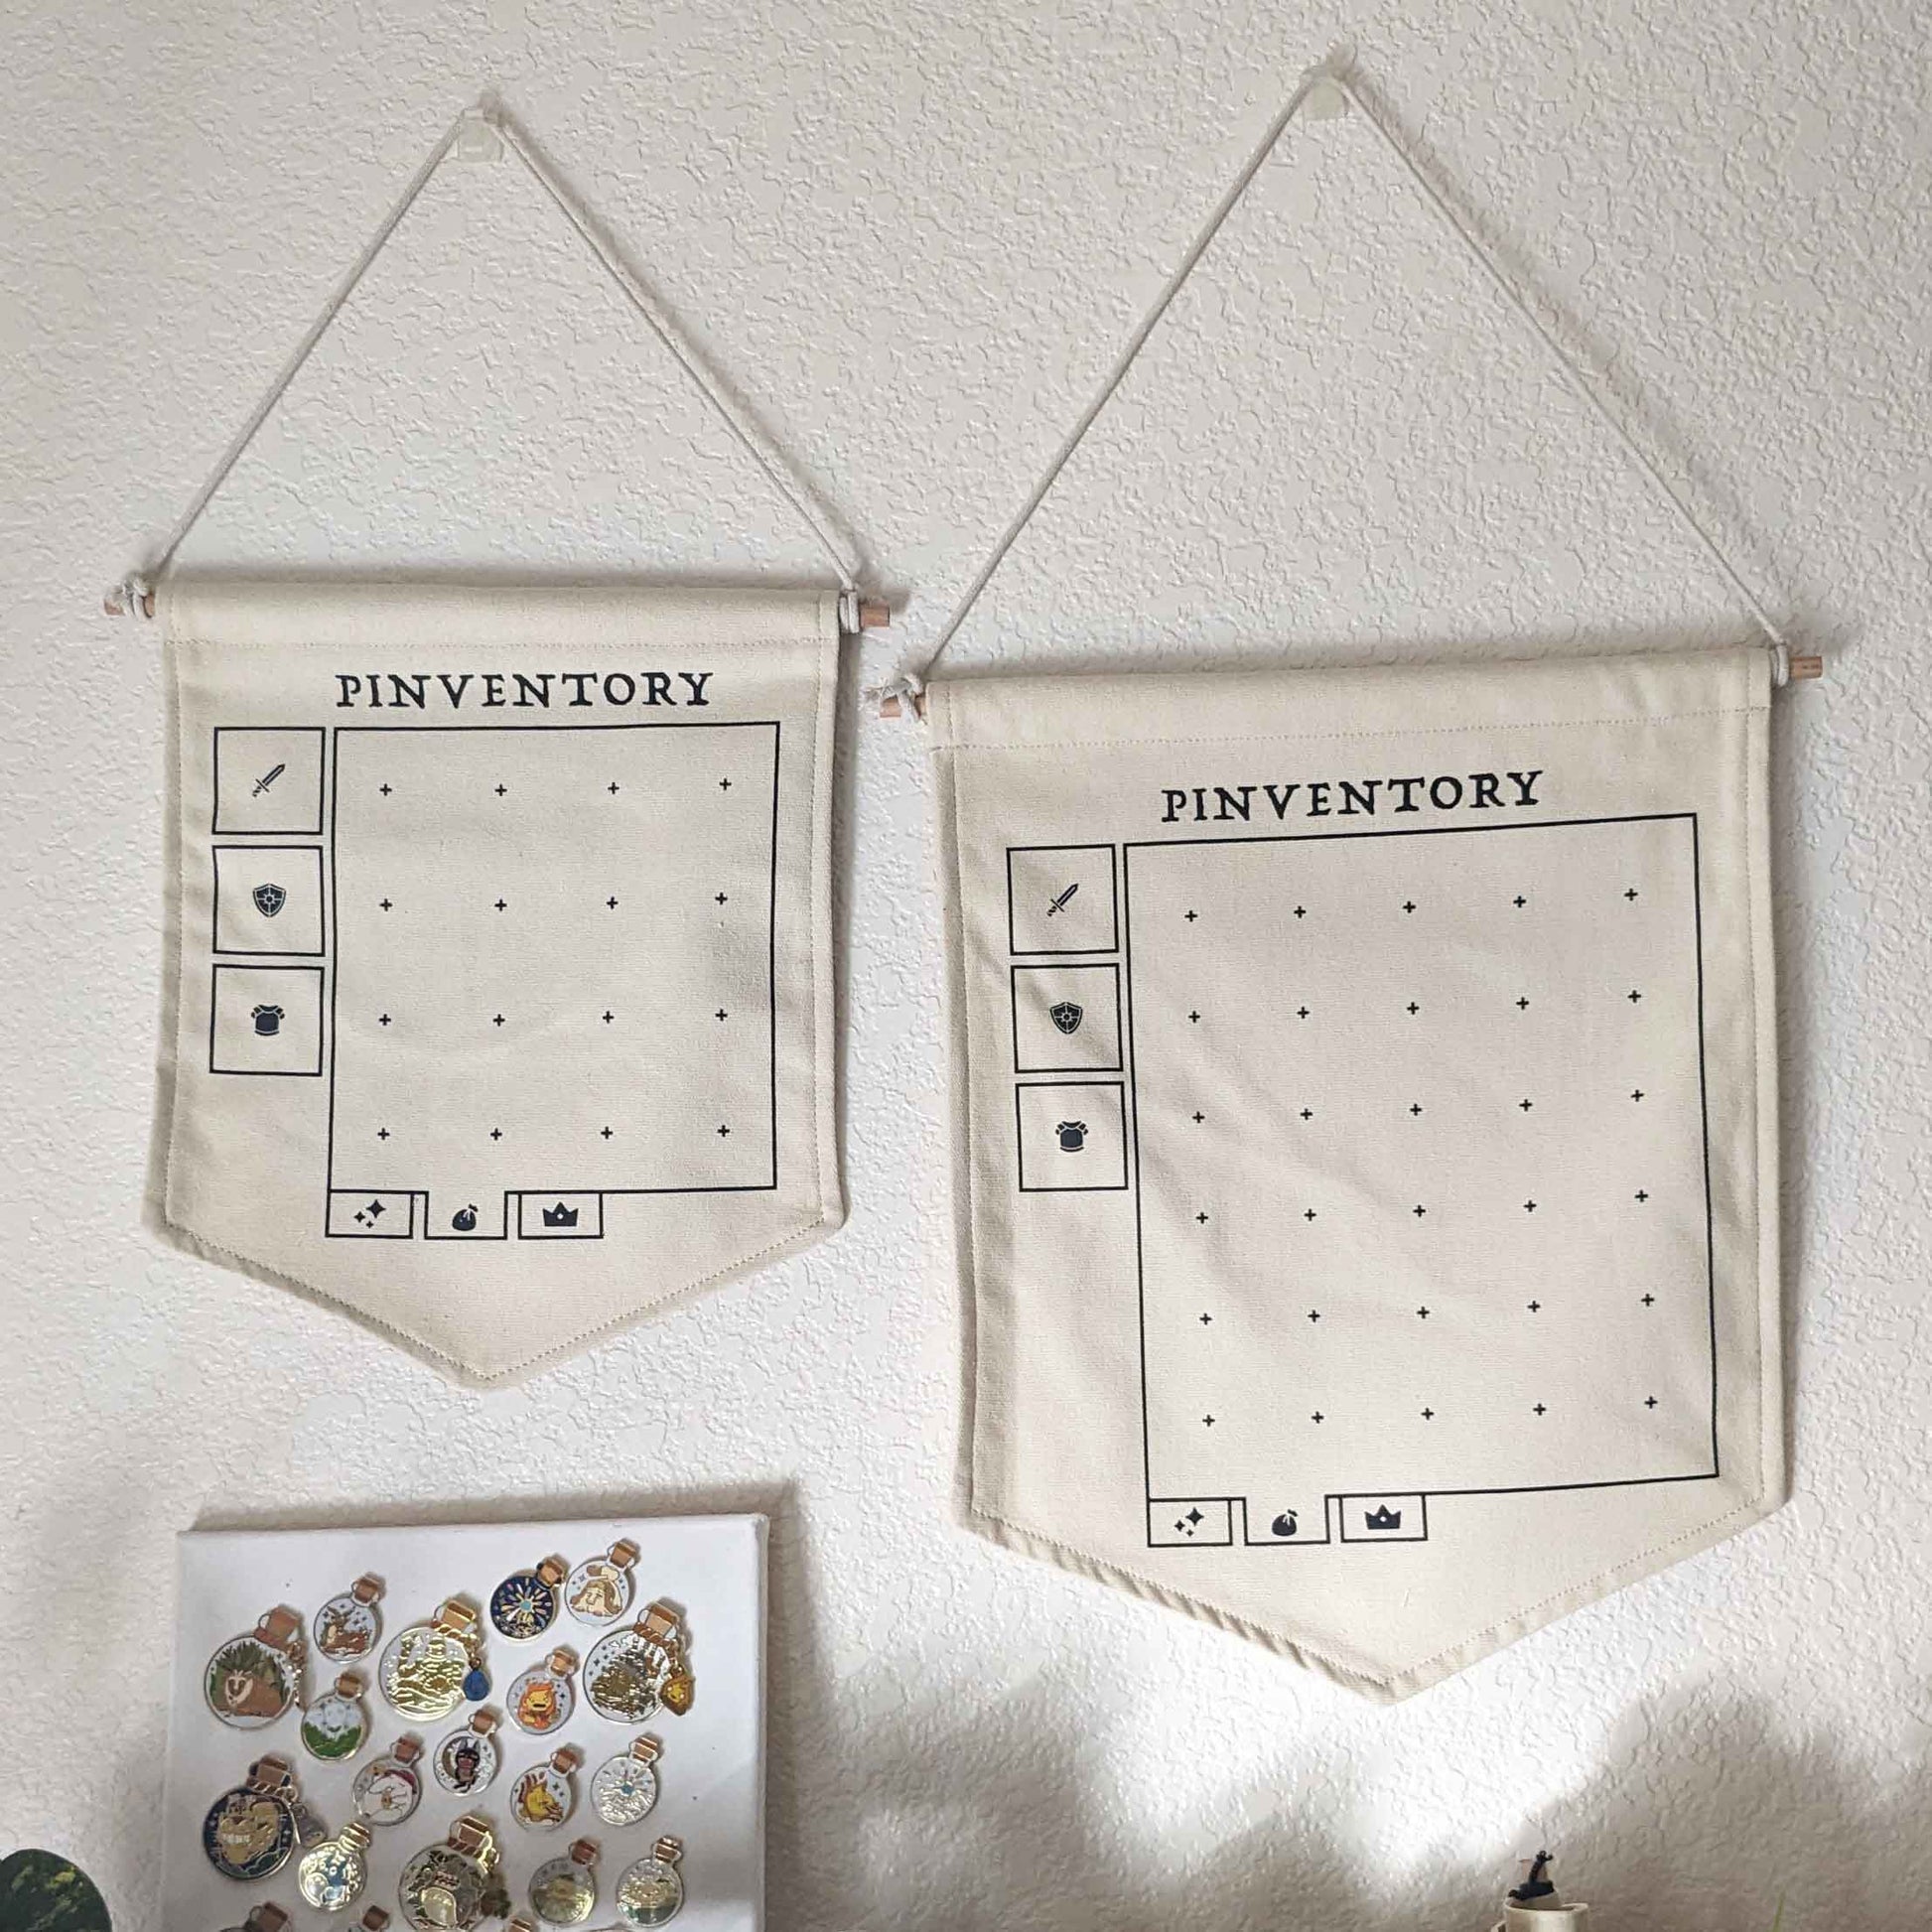 Two canvas pinventory pin banners hanging on a white wall 